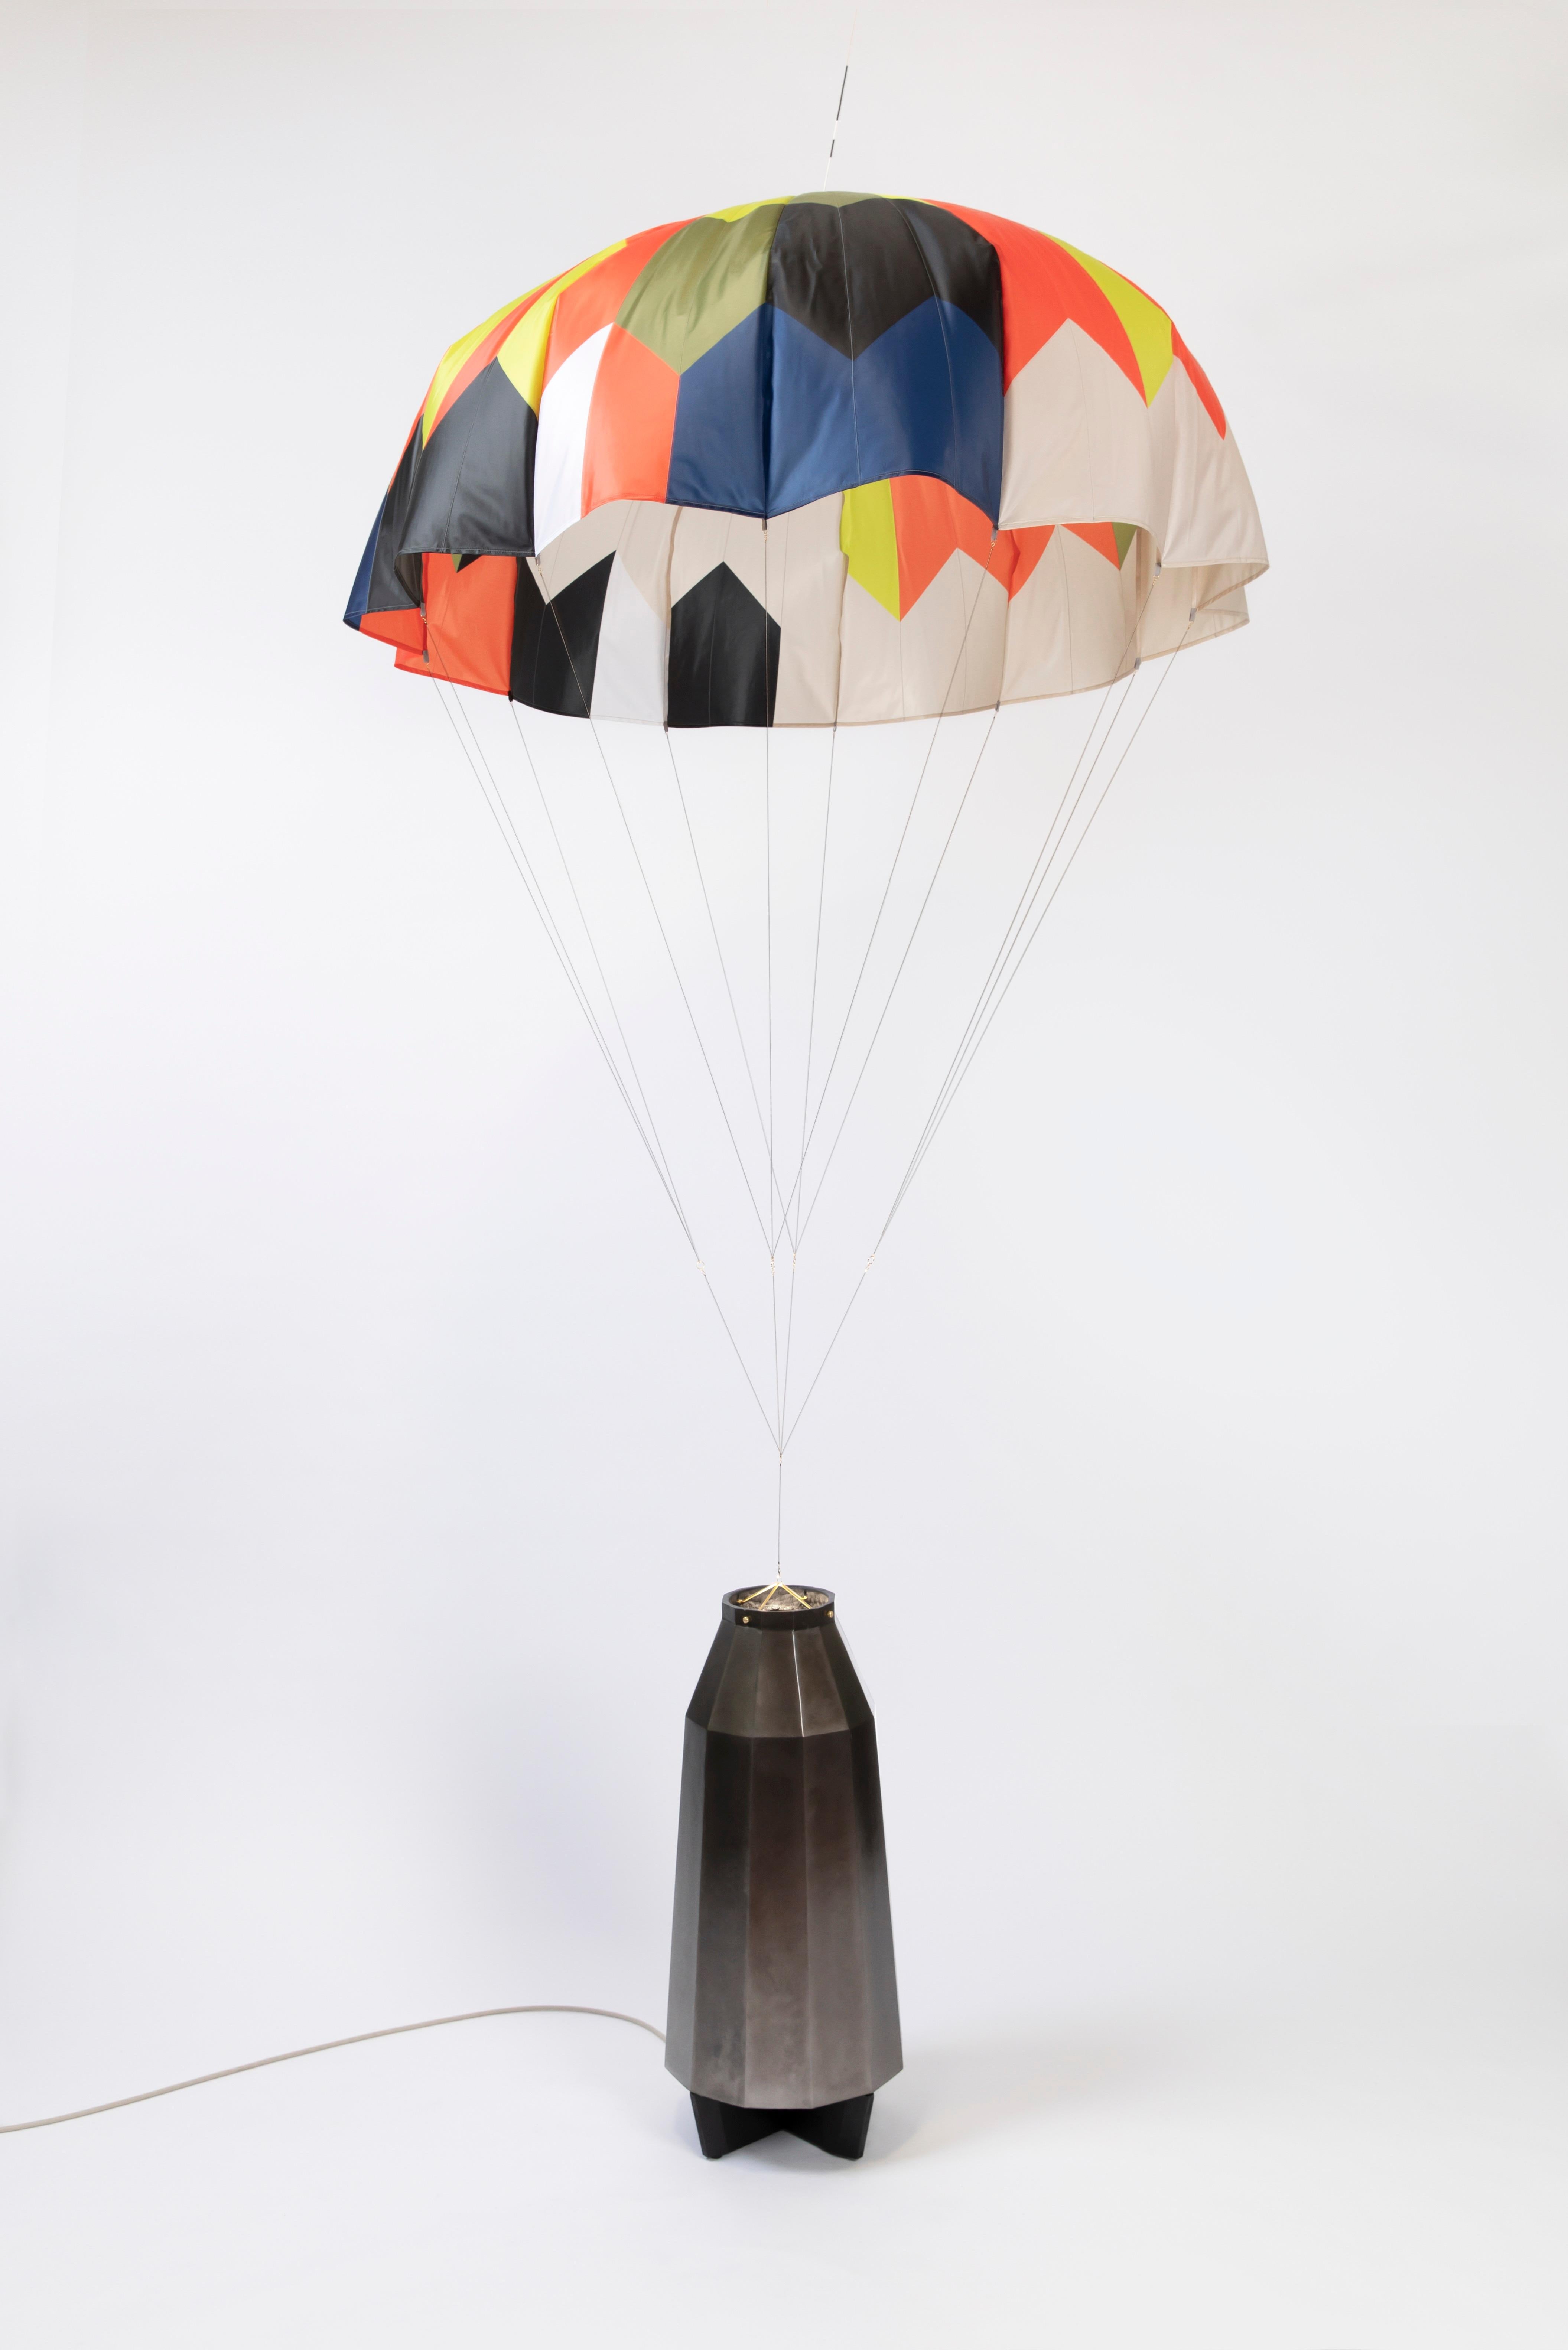 Unique and dynamic parachute lamp with a lacquered black aluminum base. A playful and engaging piece that enhances any space.

Additional Information:
From acclaimed lighting designer Bec Brittain, a new series of dynamic, whimsical lighting forms